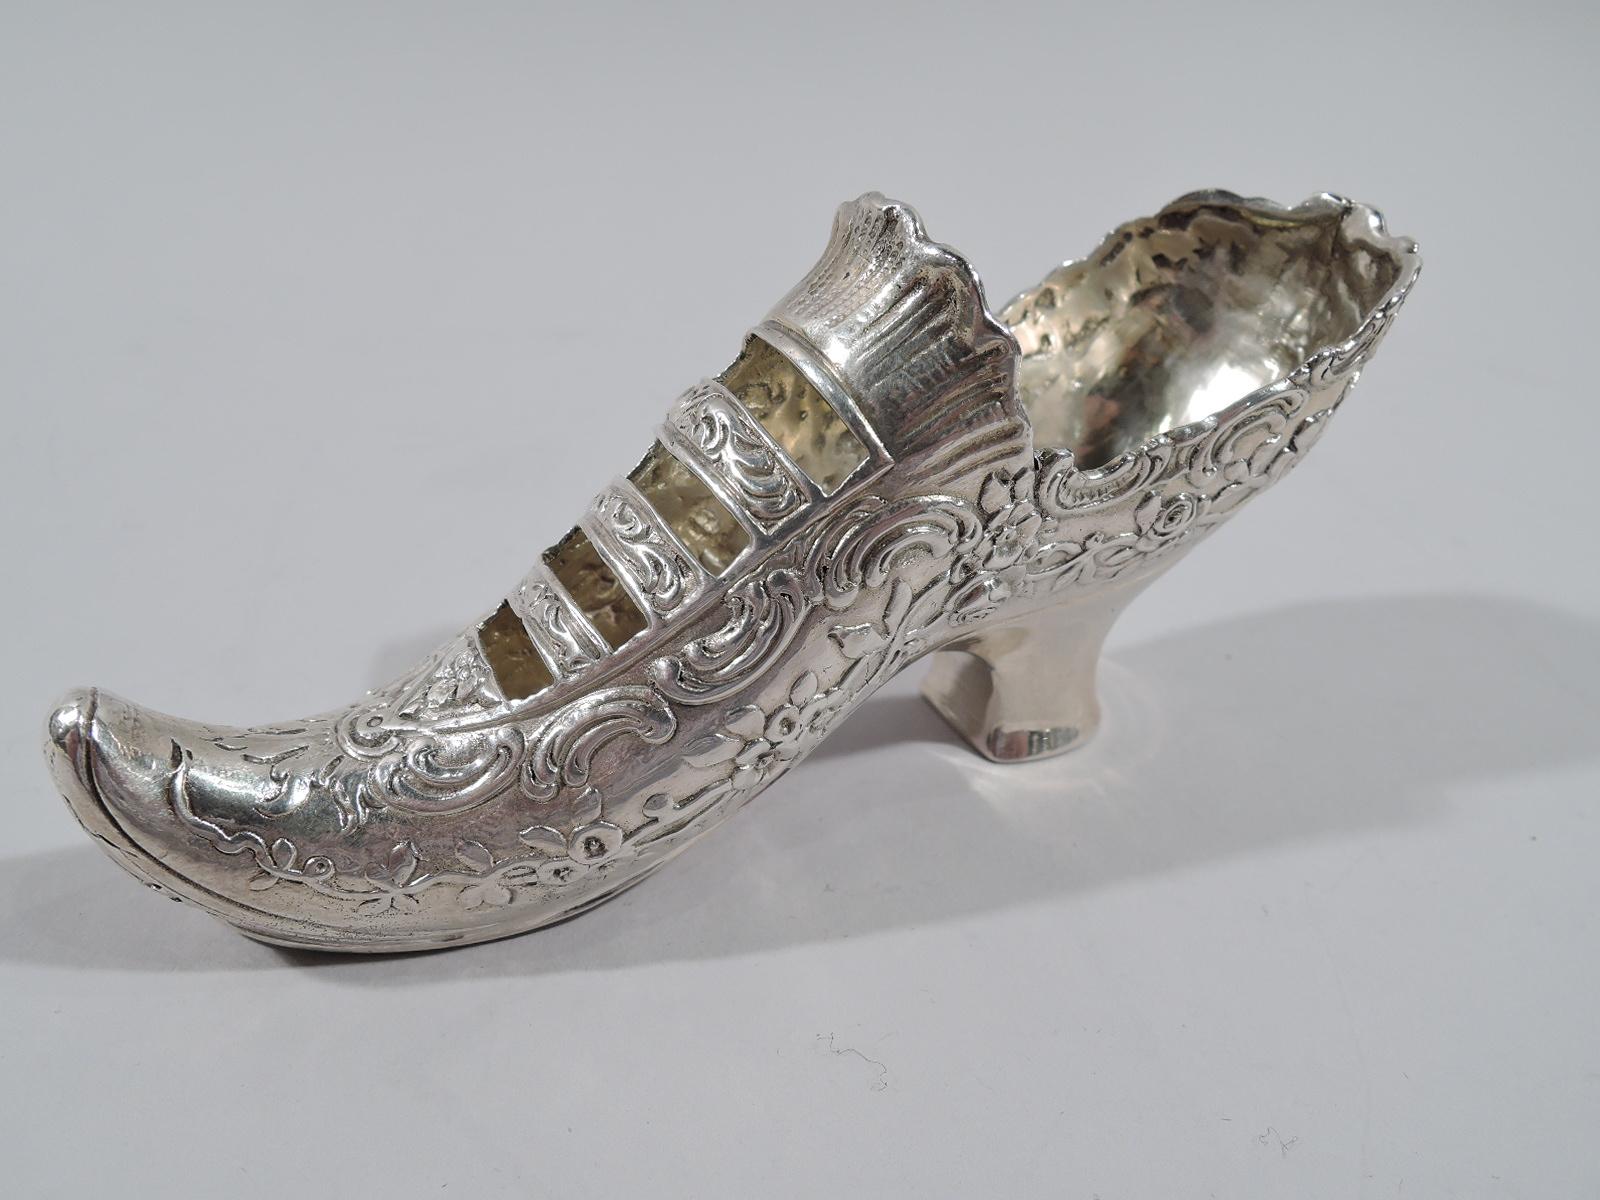 German sterling silver miniature elf shoe. Imported to England in 1904 by Berthold Muller in Chester. Rococo shoe with chased scrolls and flowers. Open bands and raised elf toe. Heel plain. German maker’s and English importer’s marks. Weight: 2.7